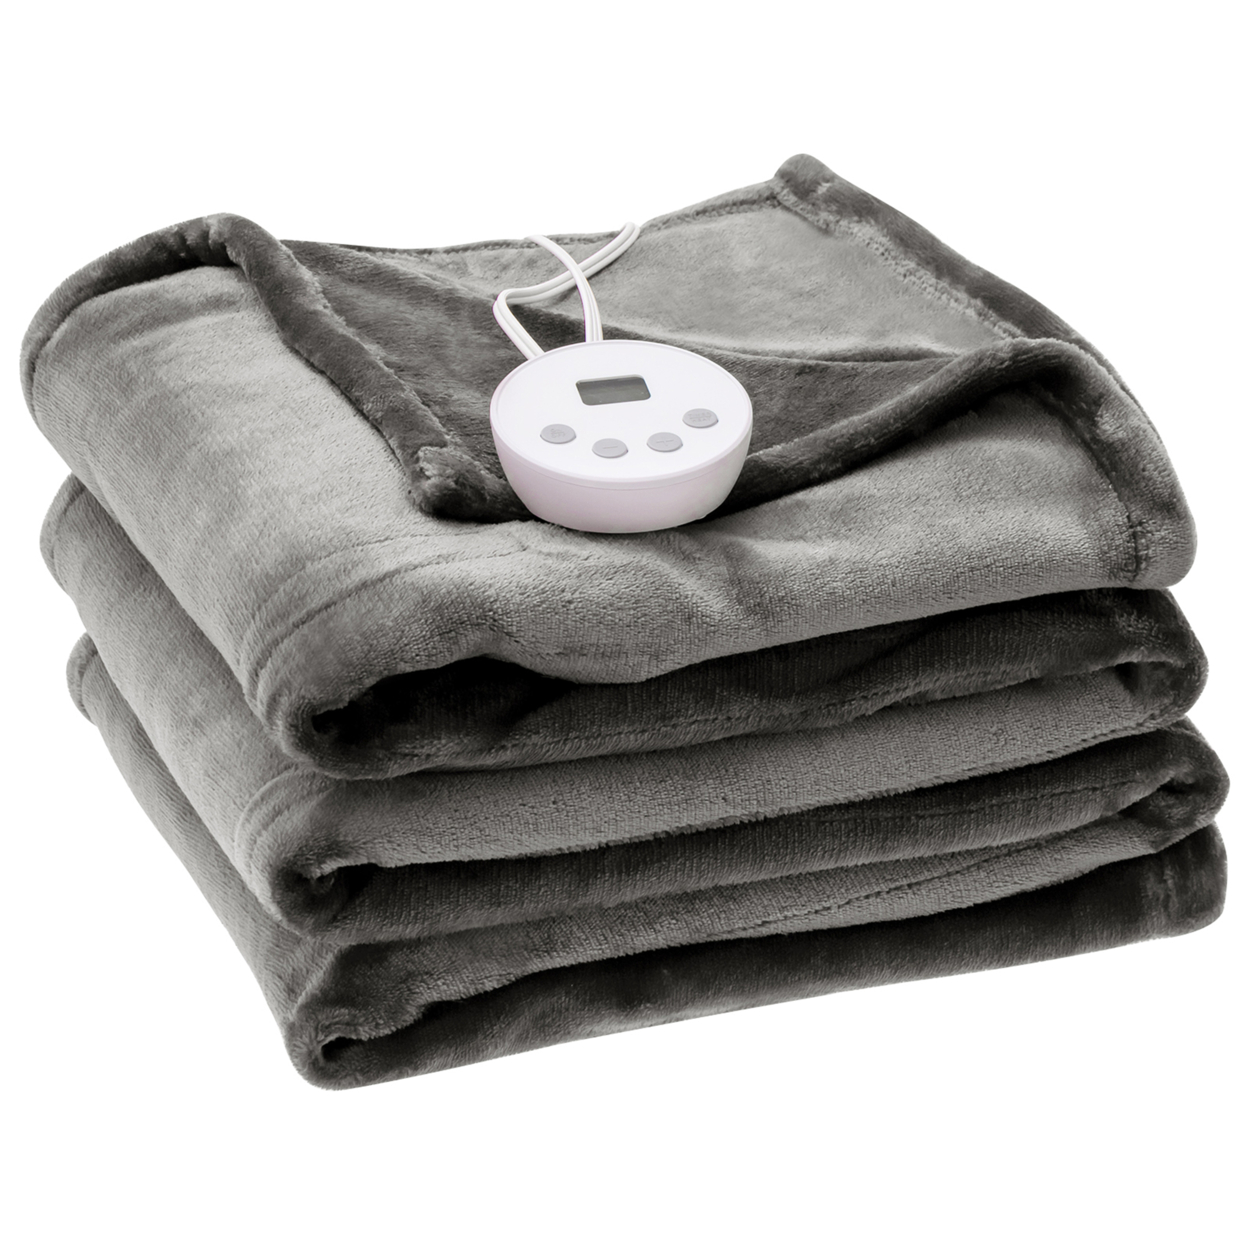 62''x84''/84''x90'' Heated Blanket Twin/Queen Size Electric Heated Throw Blanket W/ Timer - Grey, Twin